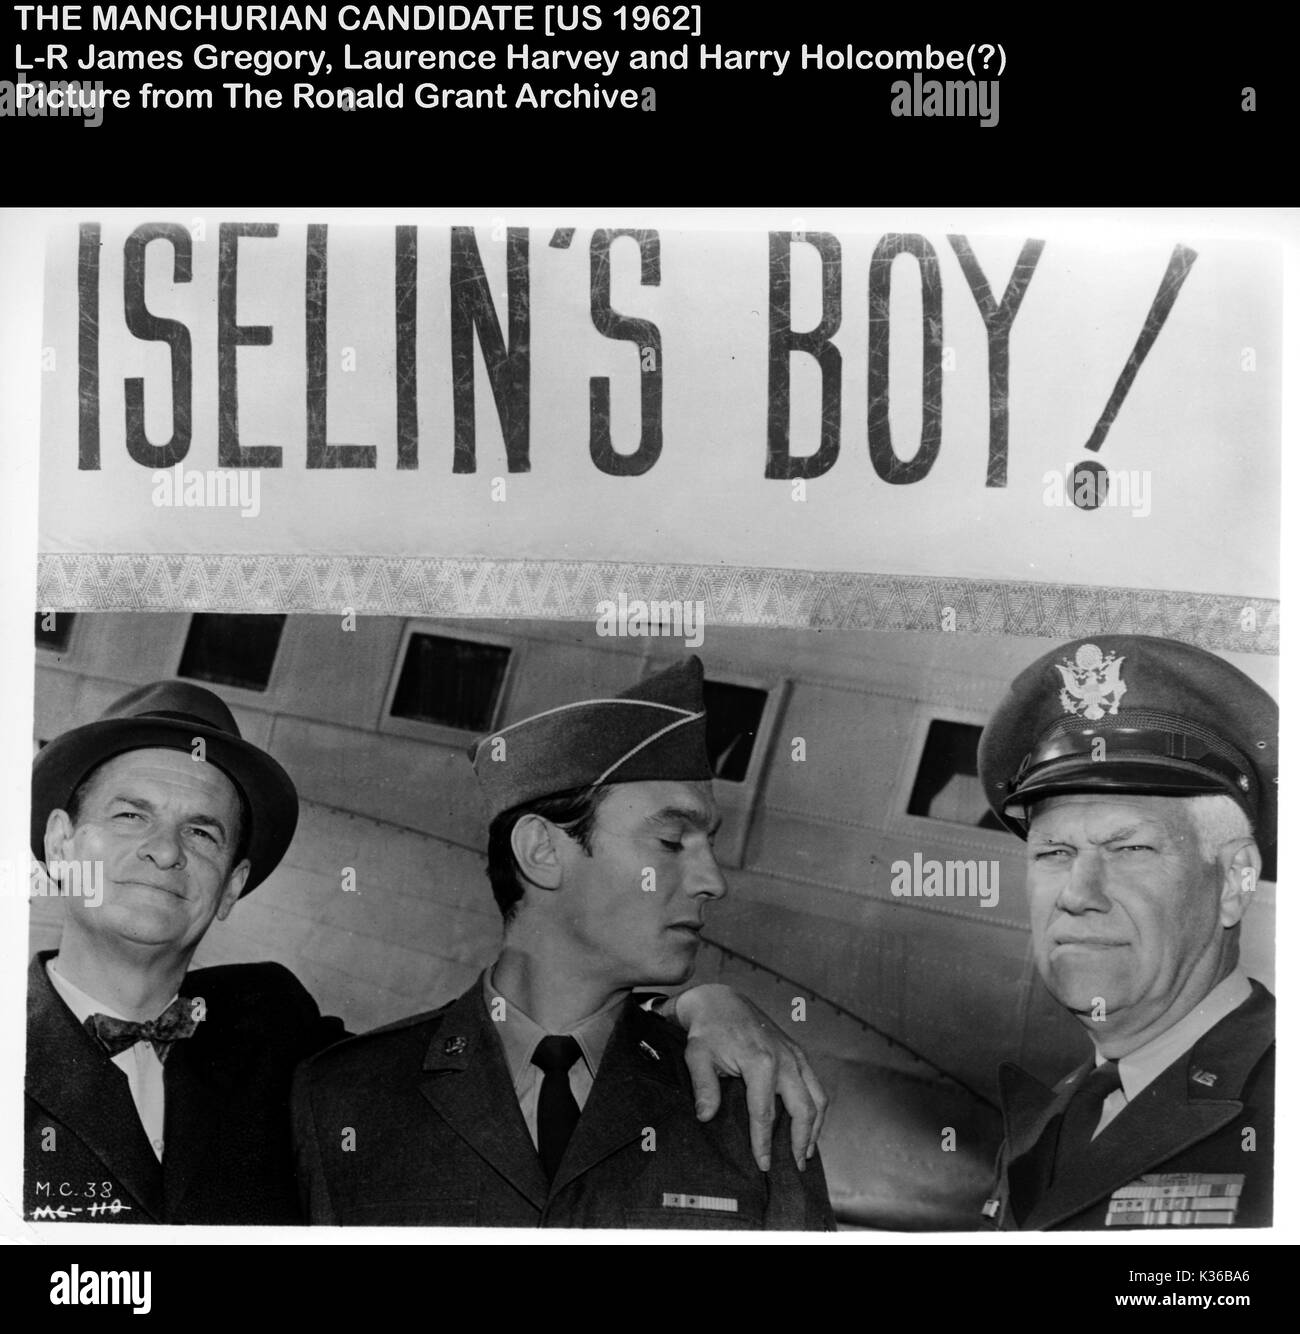 Il candidato MANCHURIAN L-R, James Gregory, Laurence Harvey, HARRY HOLCOMBE Foto Stock